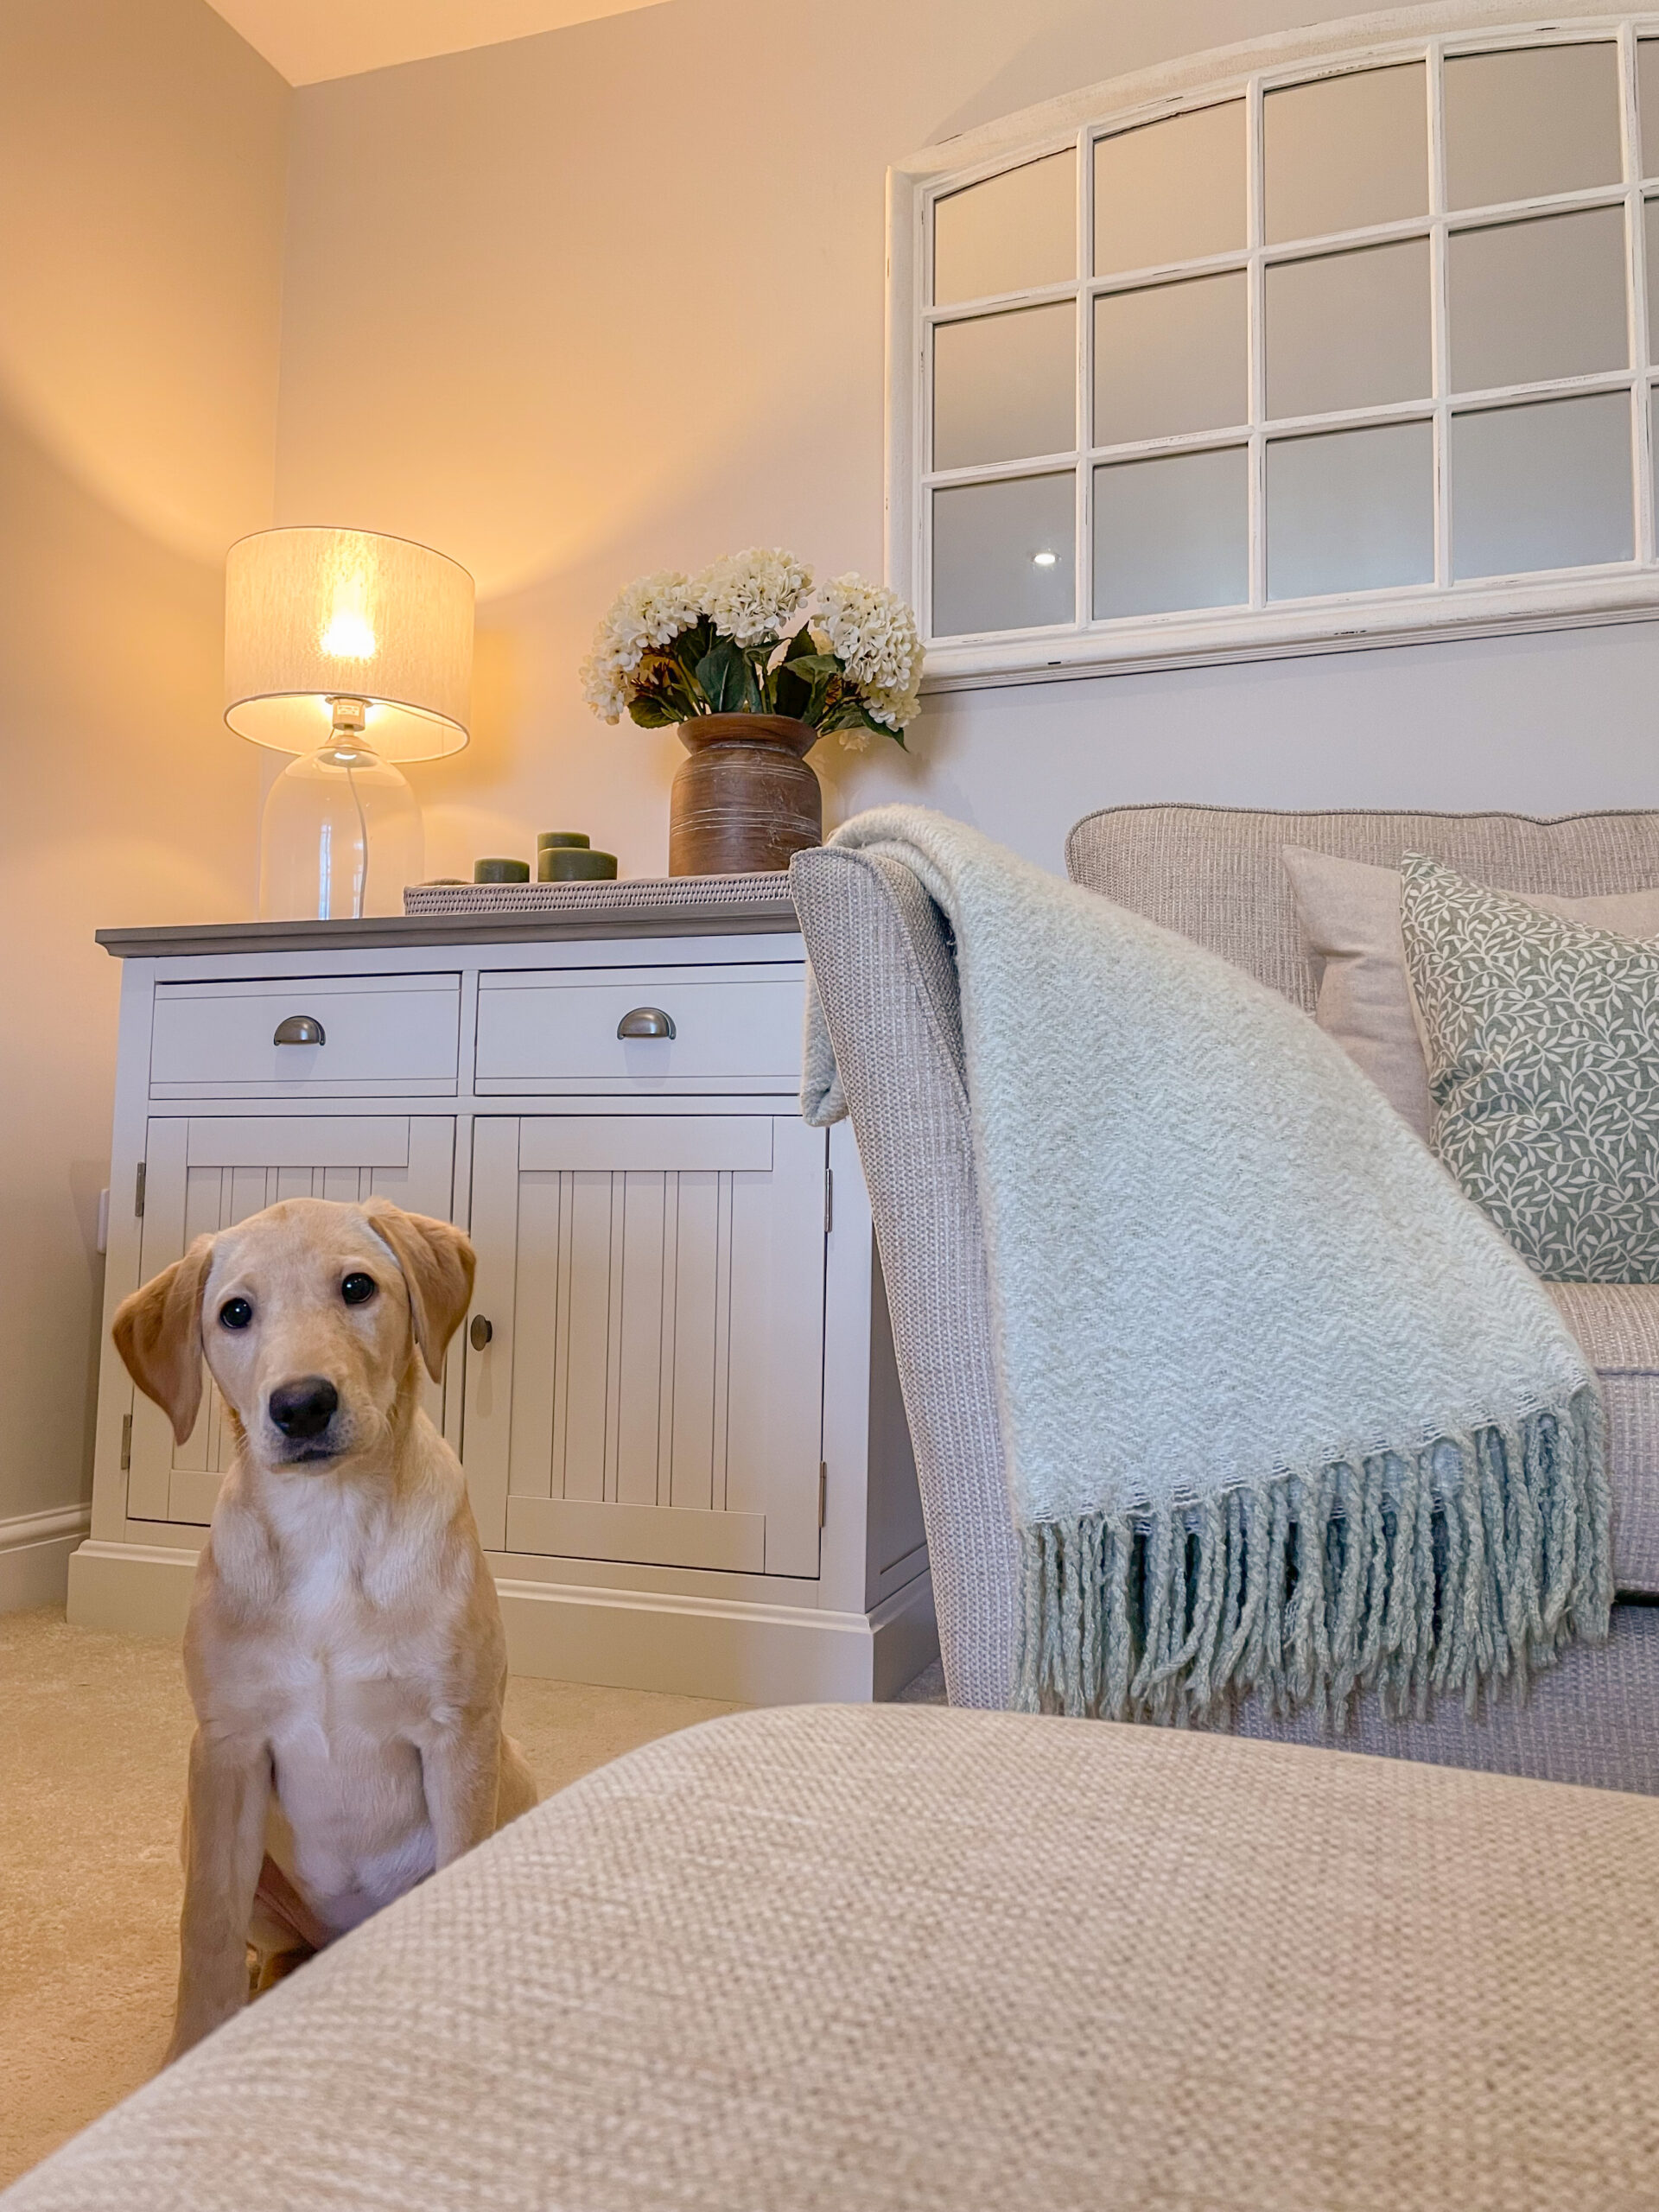 Oak Furnitureland Brompton white painted sideboard in a living room with a cream sofa and a labrador puppy looking at the camera.